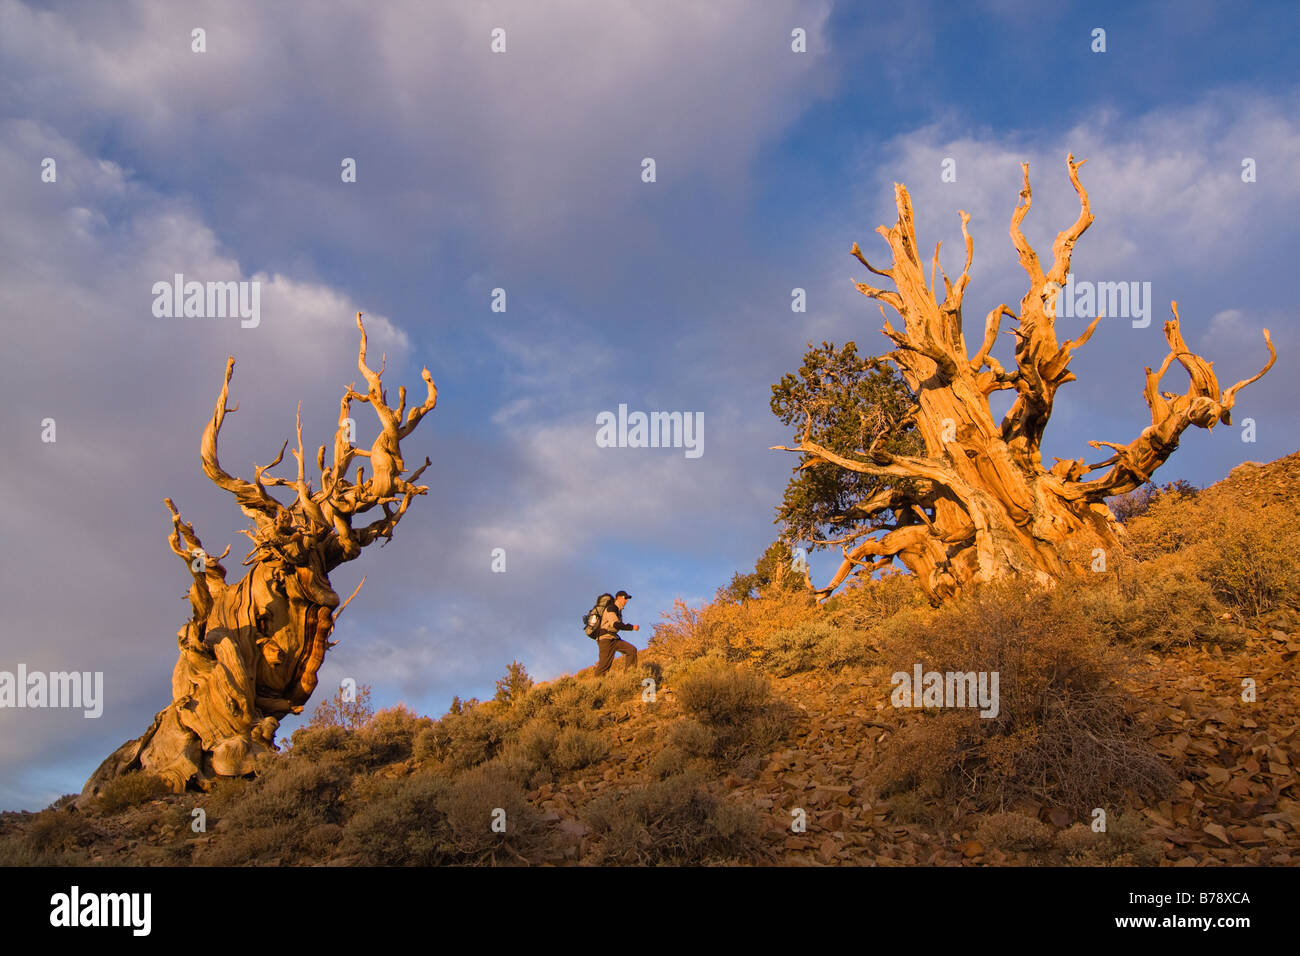 A hiker by a Bristlecone Pine tree at sunset near Bishop in California Stock Photo